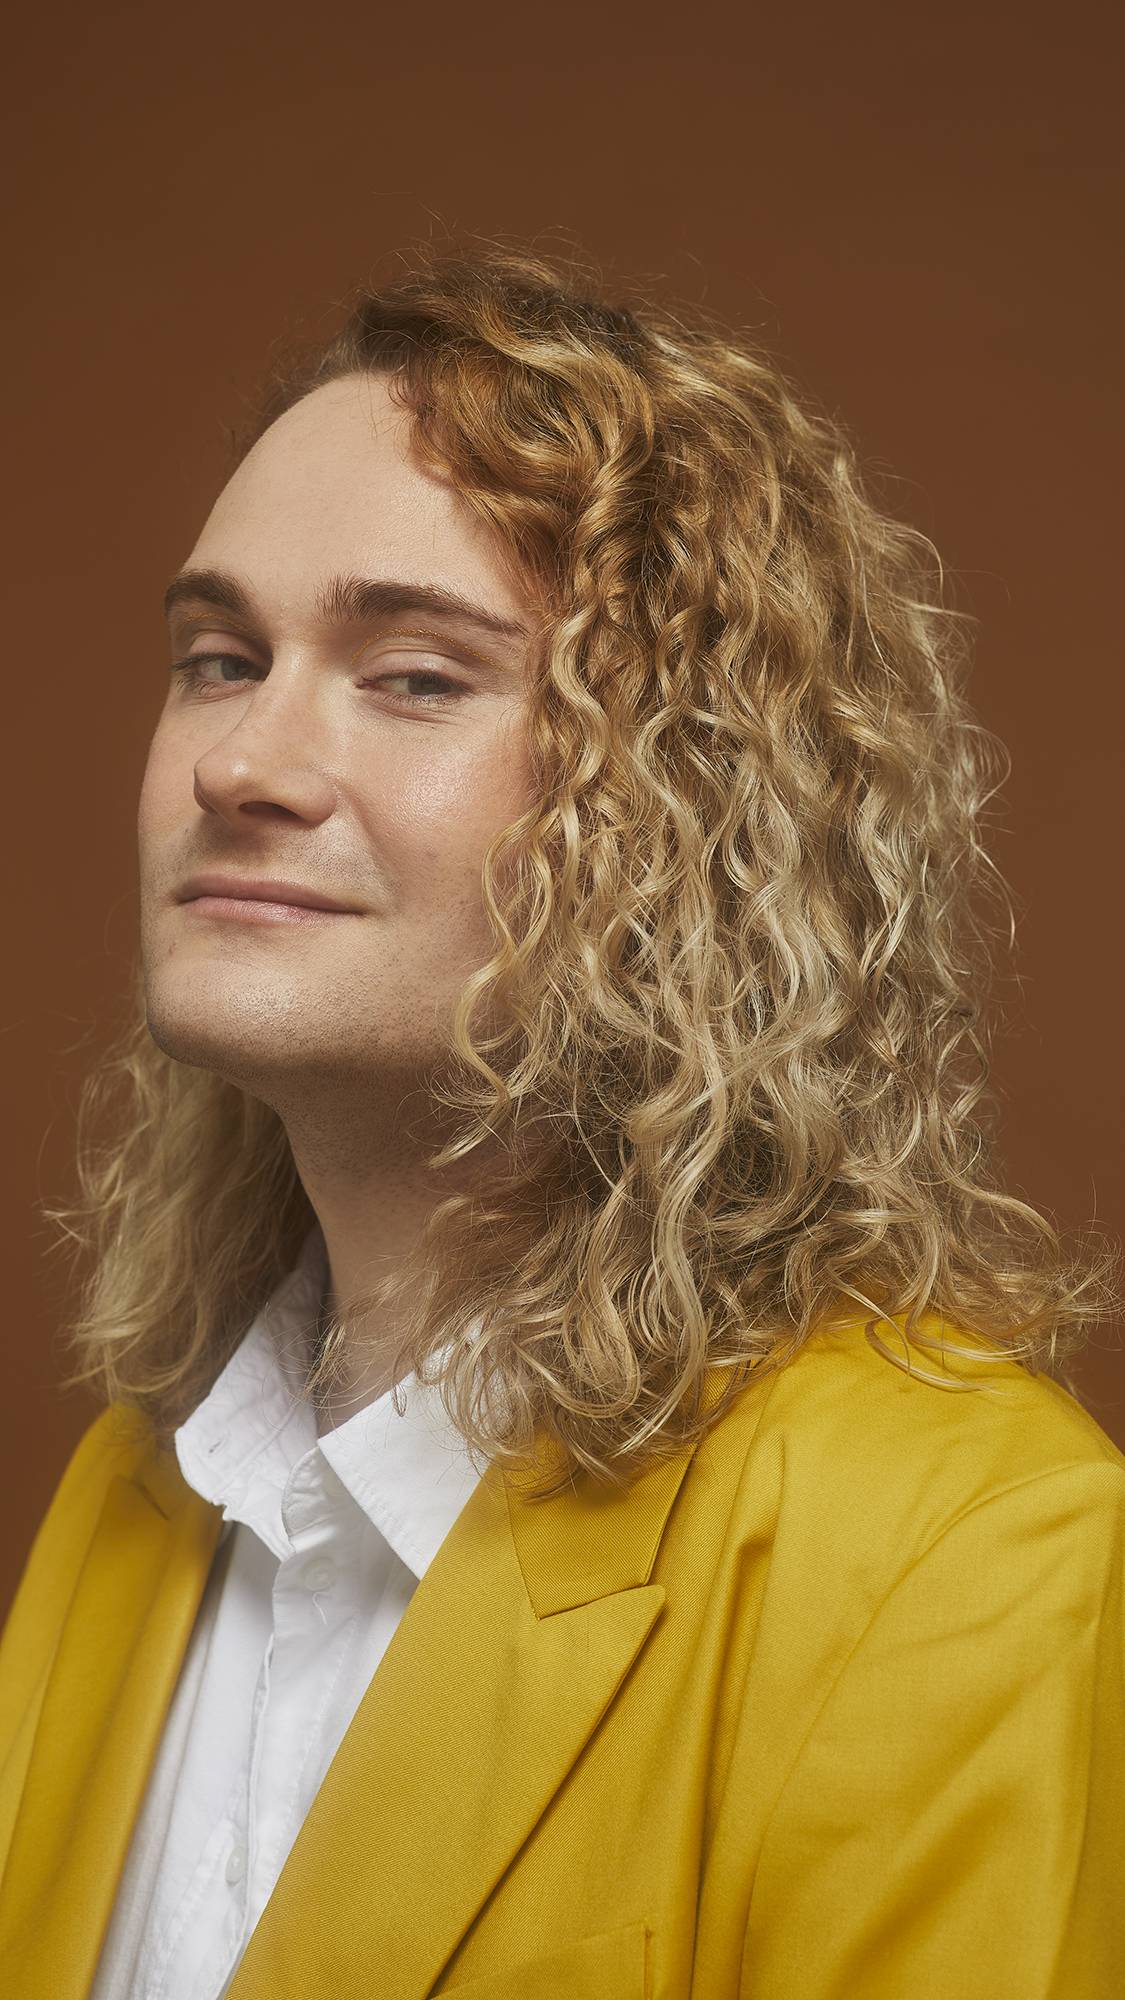 Model smiles and wears a bright yellow jacket showing defined, golden, curled locks on an earth-toned background.